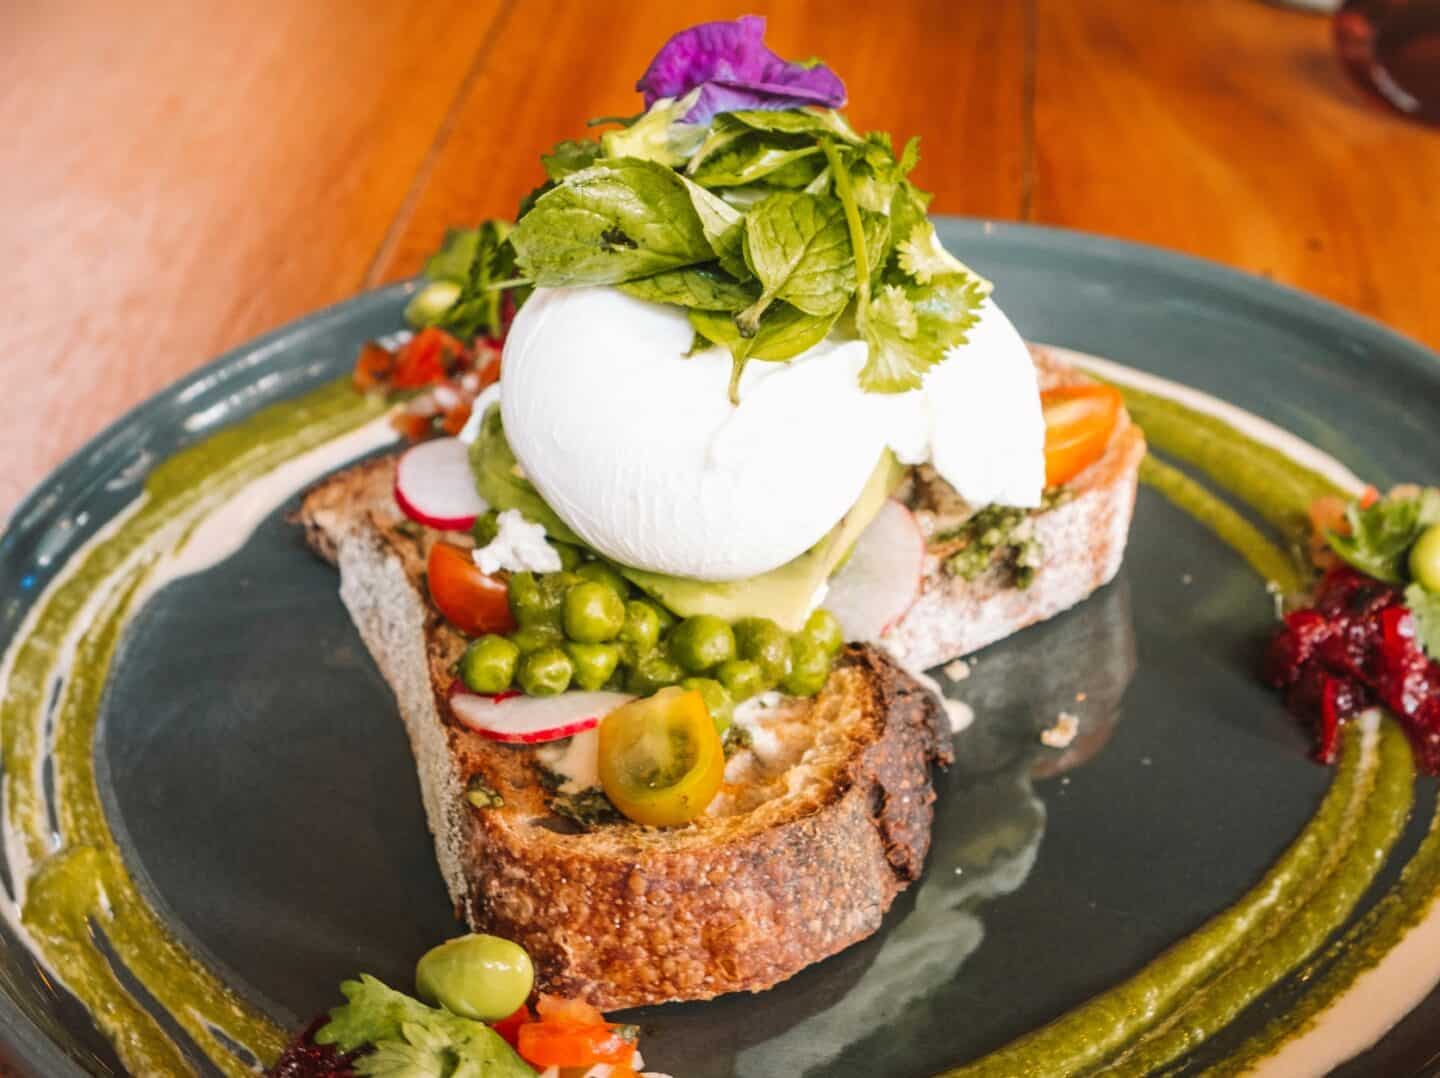 A twist on avocado toast with peas and whipped tahnini from Cafe Vida in Canggu